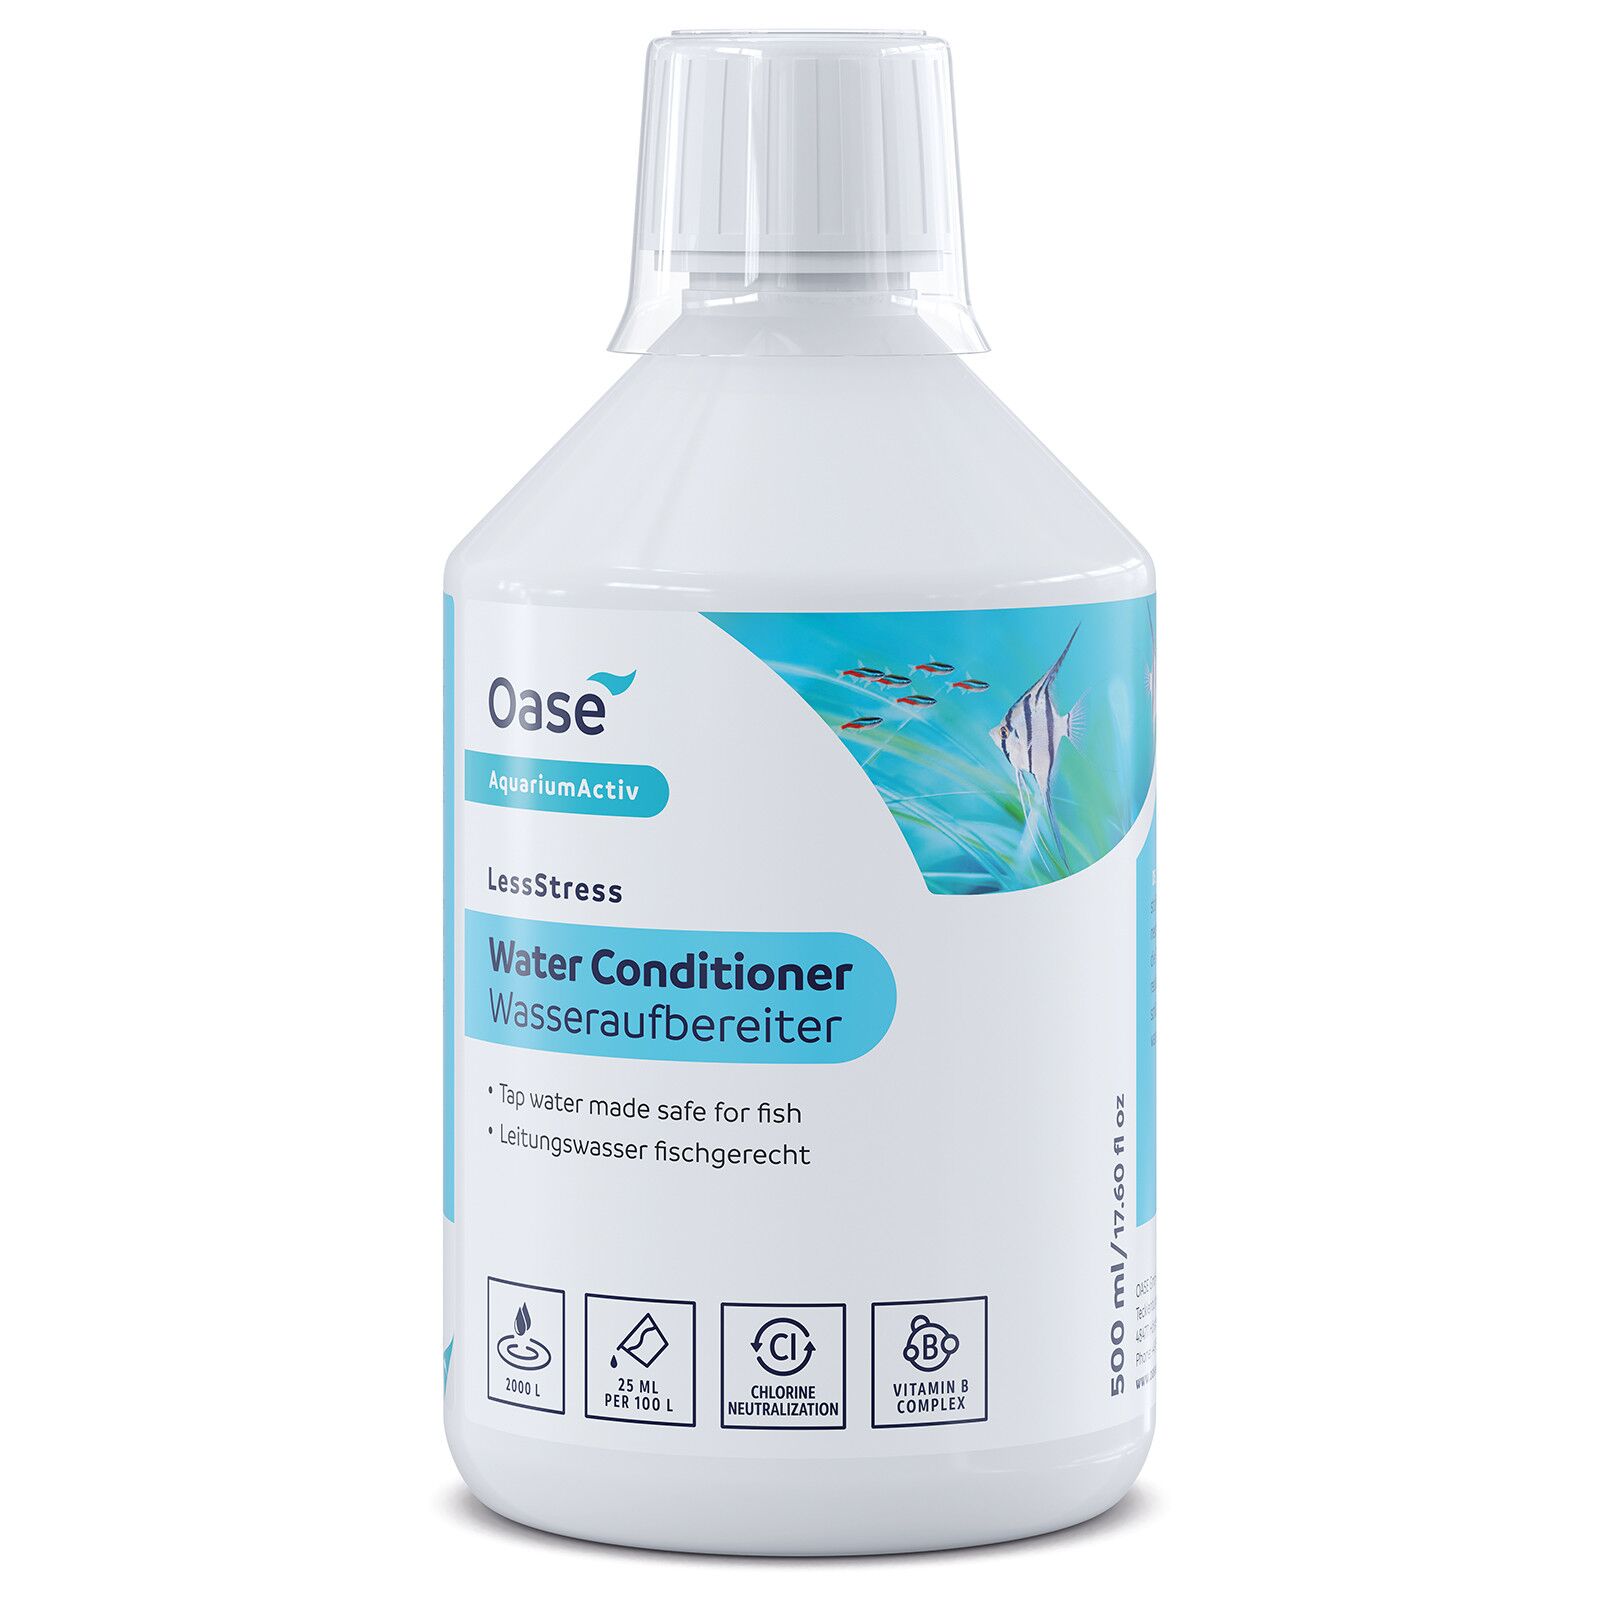 Oase - LessStress Water Conditioner